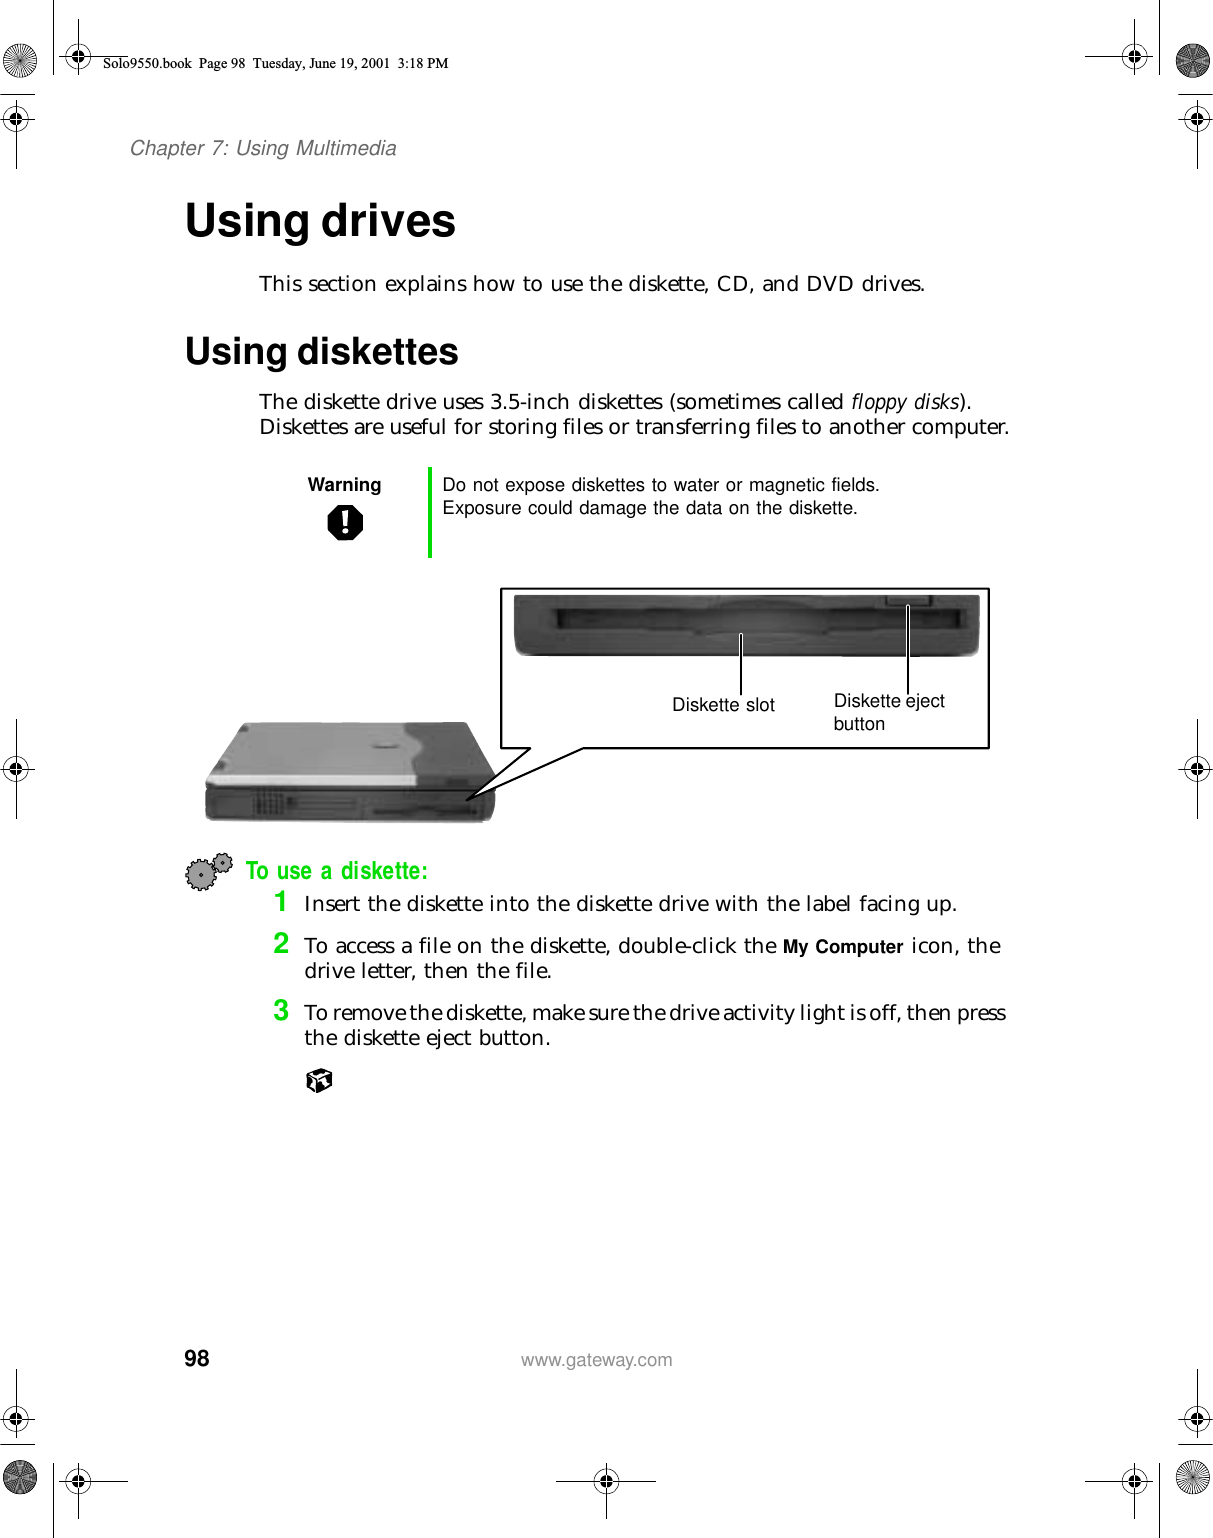 98Chapter 7: Using Multimediawww.gateway.comUsing drivesThis section explains how to use the diskette, CD, and DVD drives.Using diskettes The diskette drive uses 3.5-inch diskettes (sometimes called floppy disks). Diskettes are useful for storing files or transferring files to another computer.To use a diskette:1Insert the diskette into the diskette drive with the label facing up.2To access a file on the diskette, double-click the My Computer icon, the drive letter, then the file.3To remove the diskette, make sure the drive activity light is off, then press the diskette eject button.Warning Do not expose diskettes to water or magnetic fields. Exposure could damage the data on the diskette.Diskette slot Diskette eject buttonSolo9550.book Page 98 Tuesday, June 19, 2001 3:18 PM